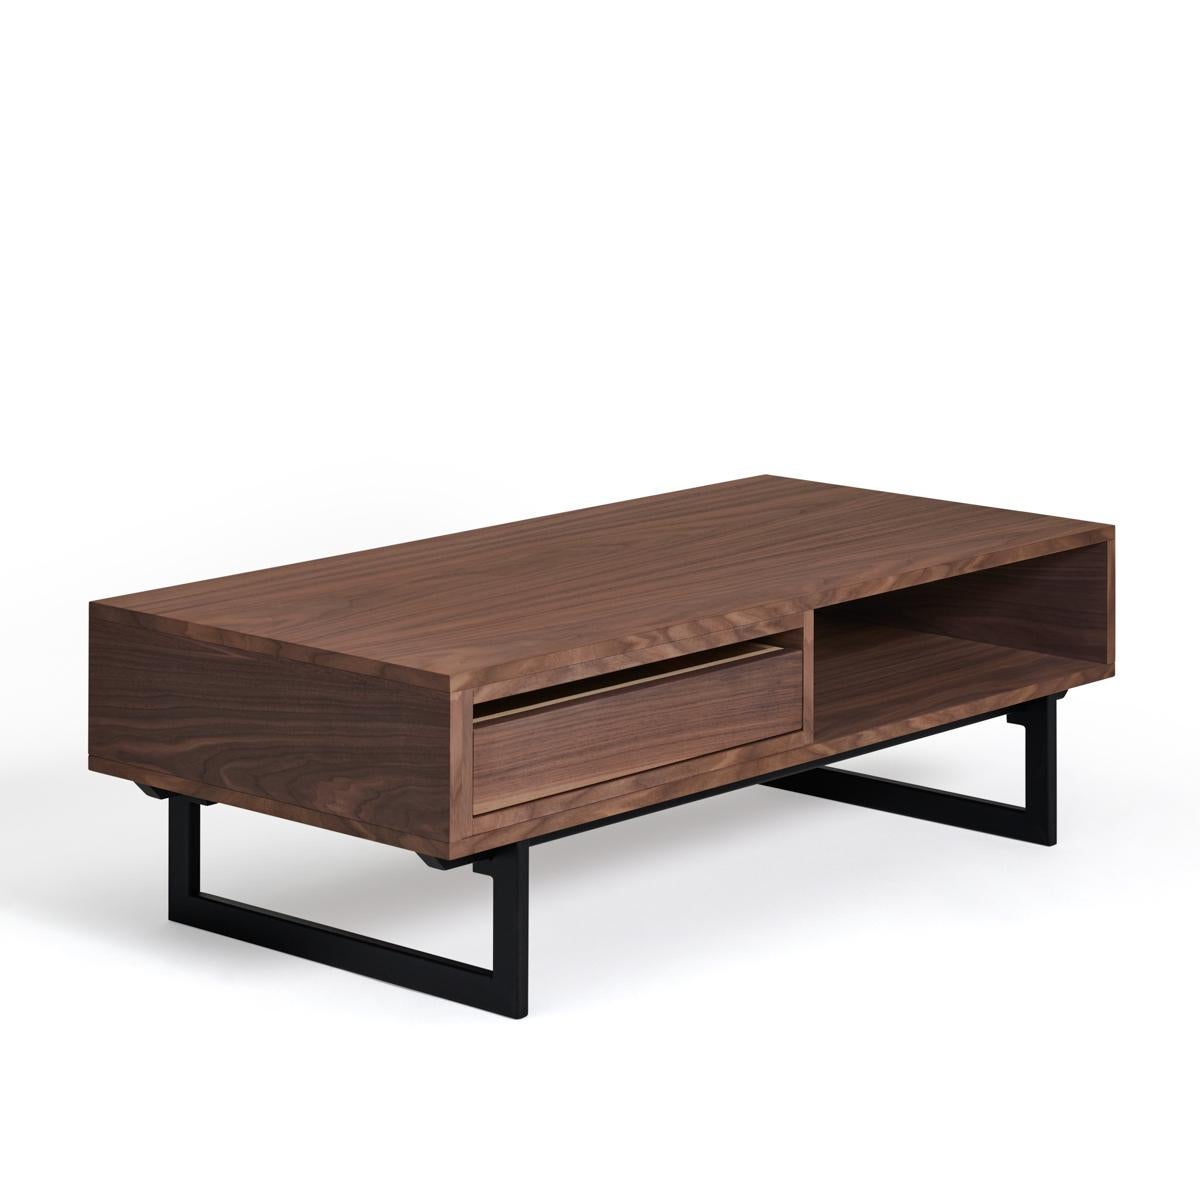 French 2-drawer coffee table in walnut & black iron feet, design by Christophe Lecomte For Sale